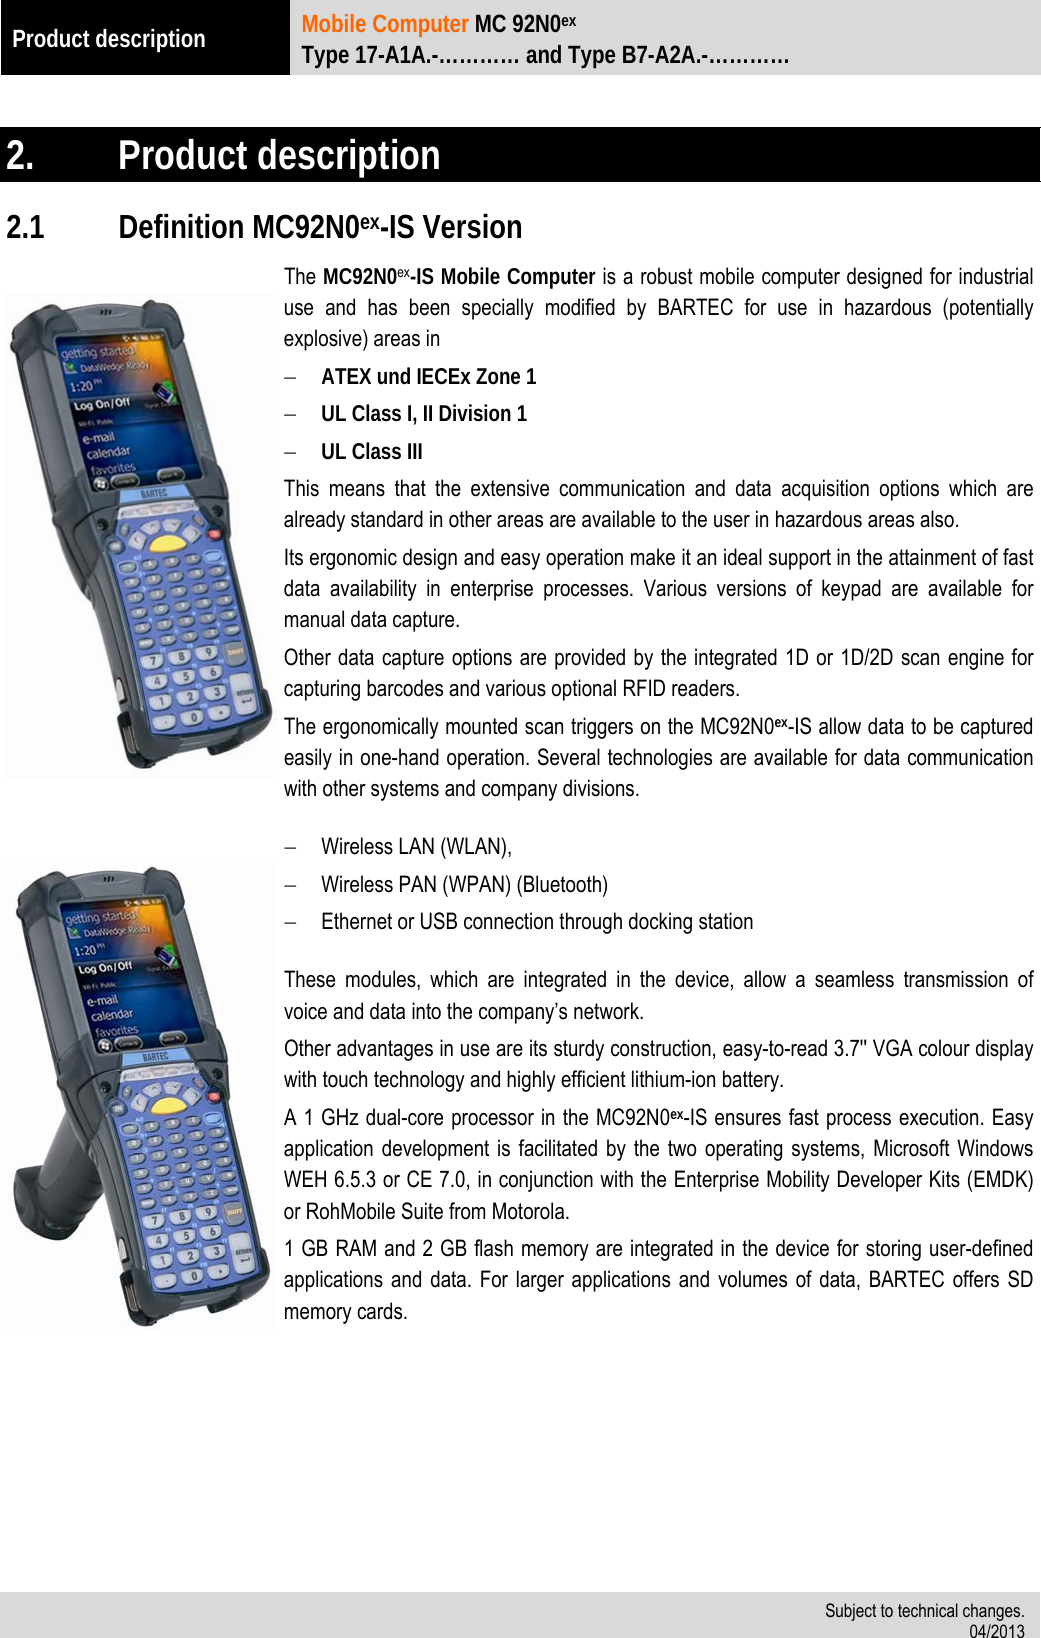 Product description  Mobile Computer MC 92N0ex Type 17-A1A.-………… and Type B7-A2A.-…………   Subject to technical changes. 04/2013   2.  Product description 2.1 Definition MC92N0ex-IS Version The MC92N0ex-IS Mobile Computer is a robust mobile computer designed for industrial use and has been specially modified by BARTEC for use in hazardous (potentially explosive) areas in  ATEX und IECEx Zone 1  UL Class I, II Division 1  UL Class III This means that the extensive communication and data acquisition options which are already standard in other areas are available to the user in hazardous areas also. Its ergonomic design and easy operation make it an ideal support in the attainment of fast data availability in enterprise processes. Various versions of keypad are available for manual data capture. Other data capture options are provided by the integrated 1D or 1D/2D scan engine for capturing barcodes and various optional RFID readers. The ergonomically mounted scan triggers on the MC92N0ex-IS allow data to be captured easily in one-hand operation. Several technologies are available for data communication with other systems and company divisions.   Wireless LAN (WLAN),  Wireless PAN (WPAN) (Bluetooth)  Ethernet or USB connection through docking station  These modules, which are integrated in the device, allow a seamless transmission of voice and data into the company’s network.  Other advantages in use are its sturdy construction, easy-to-read 3.7&apos;&apos; VGA colour display with touch technology and highly efficient lithium-ion battery. A 1 GHz dual-core processor in the MC92N0ex-IS ensures fast process execution. Easy application development is facilitated by the two operating systems, Microsoft Windows WEH 6.5.3 or CE 7.0, in conjunction with the Enterprise Mobility Developer Kits (EMDK) or RohMobile Suite from Motorola. 1 GB RAM and 2 GB flash memory are integrated in the device for storing user-defined applications and data. For larger applications and volumes of data, BARTEC offers SD memory cards.     